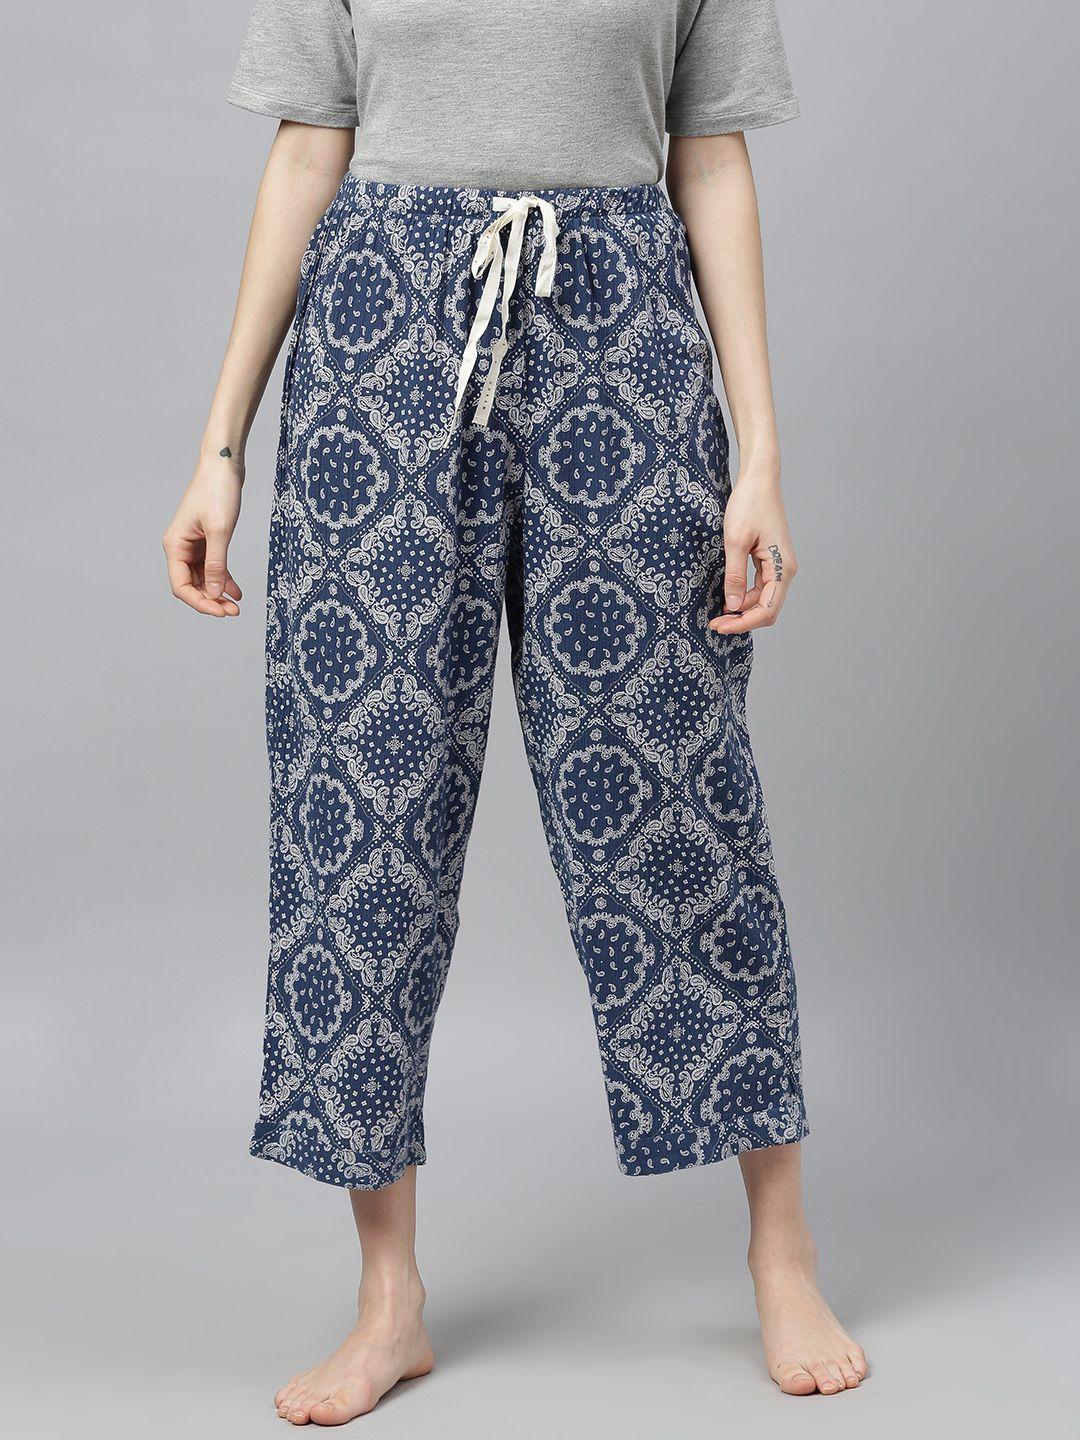 chemistry woman's navy blue and white printed cropped lounge pants